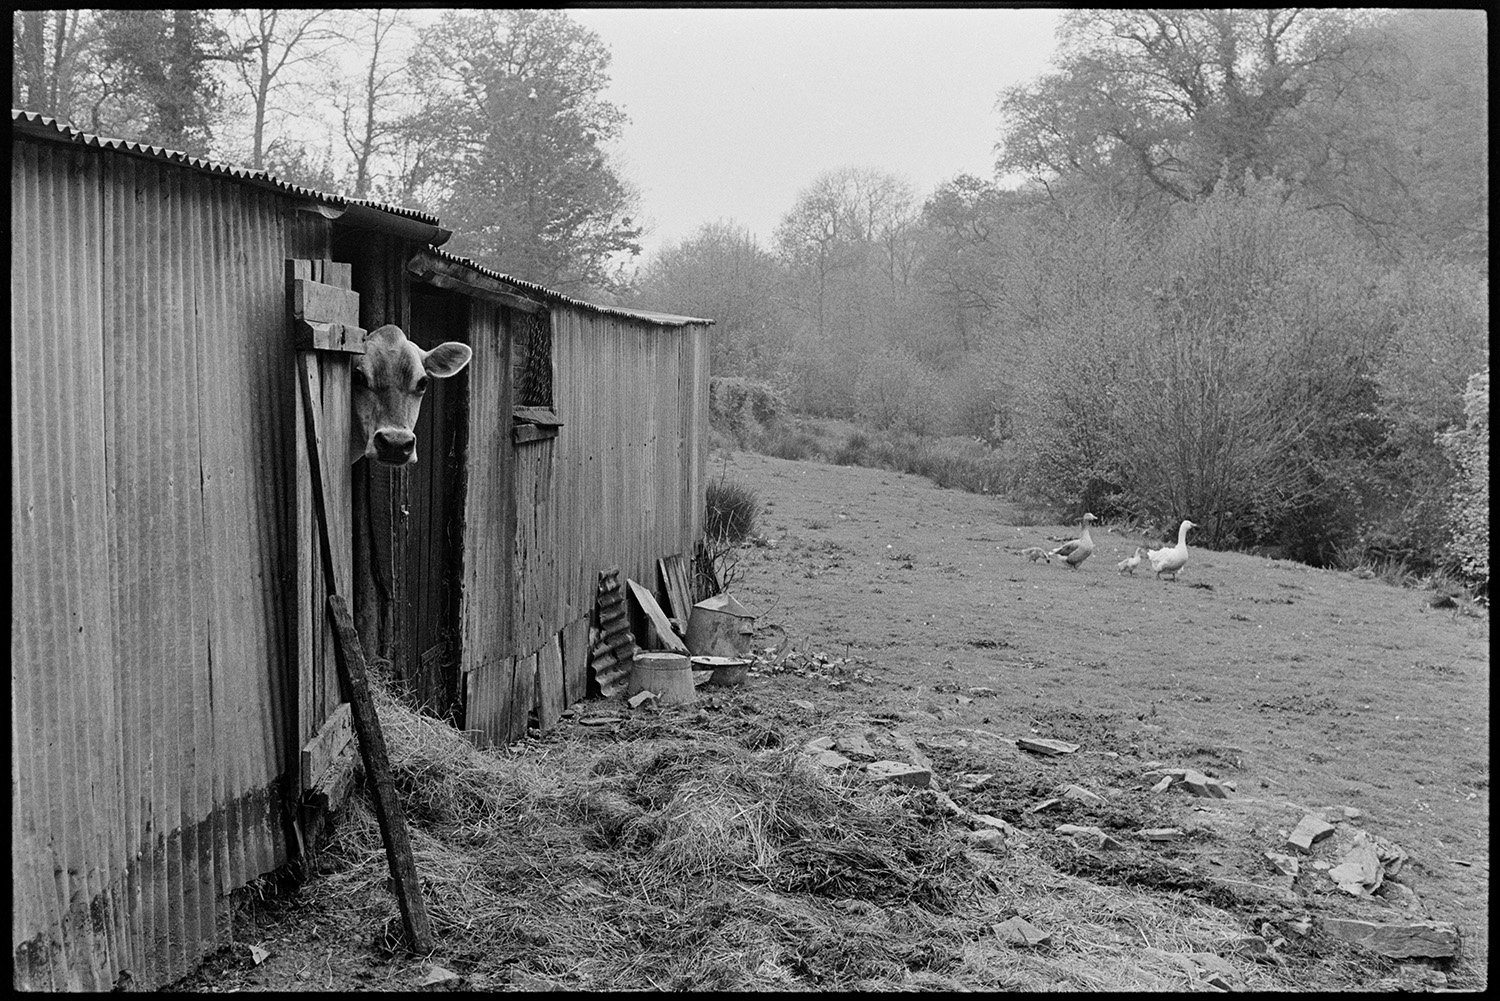 Cow in shed, goat, geese, stream, old mangle. 
[A cow looking out of a corrugated iron shed in a field at Millhams, Dolton. Geese are walking through the field in the background.]